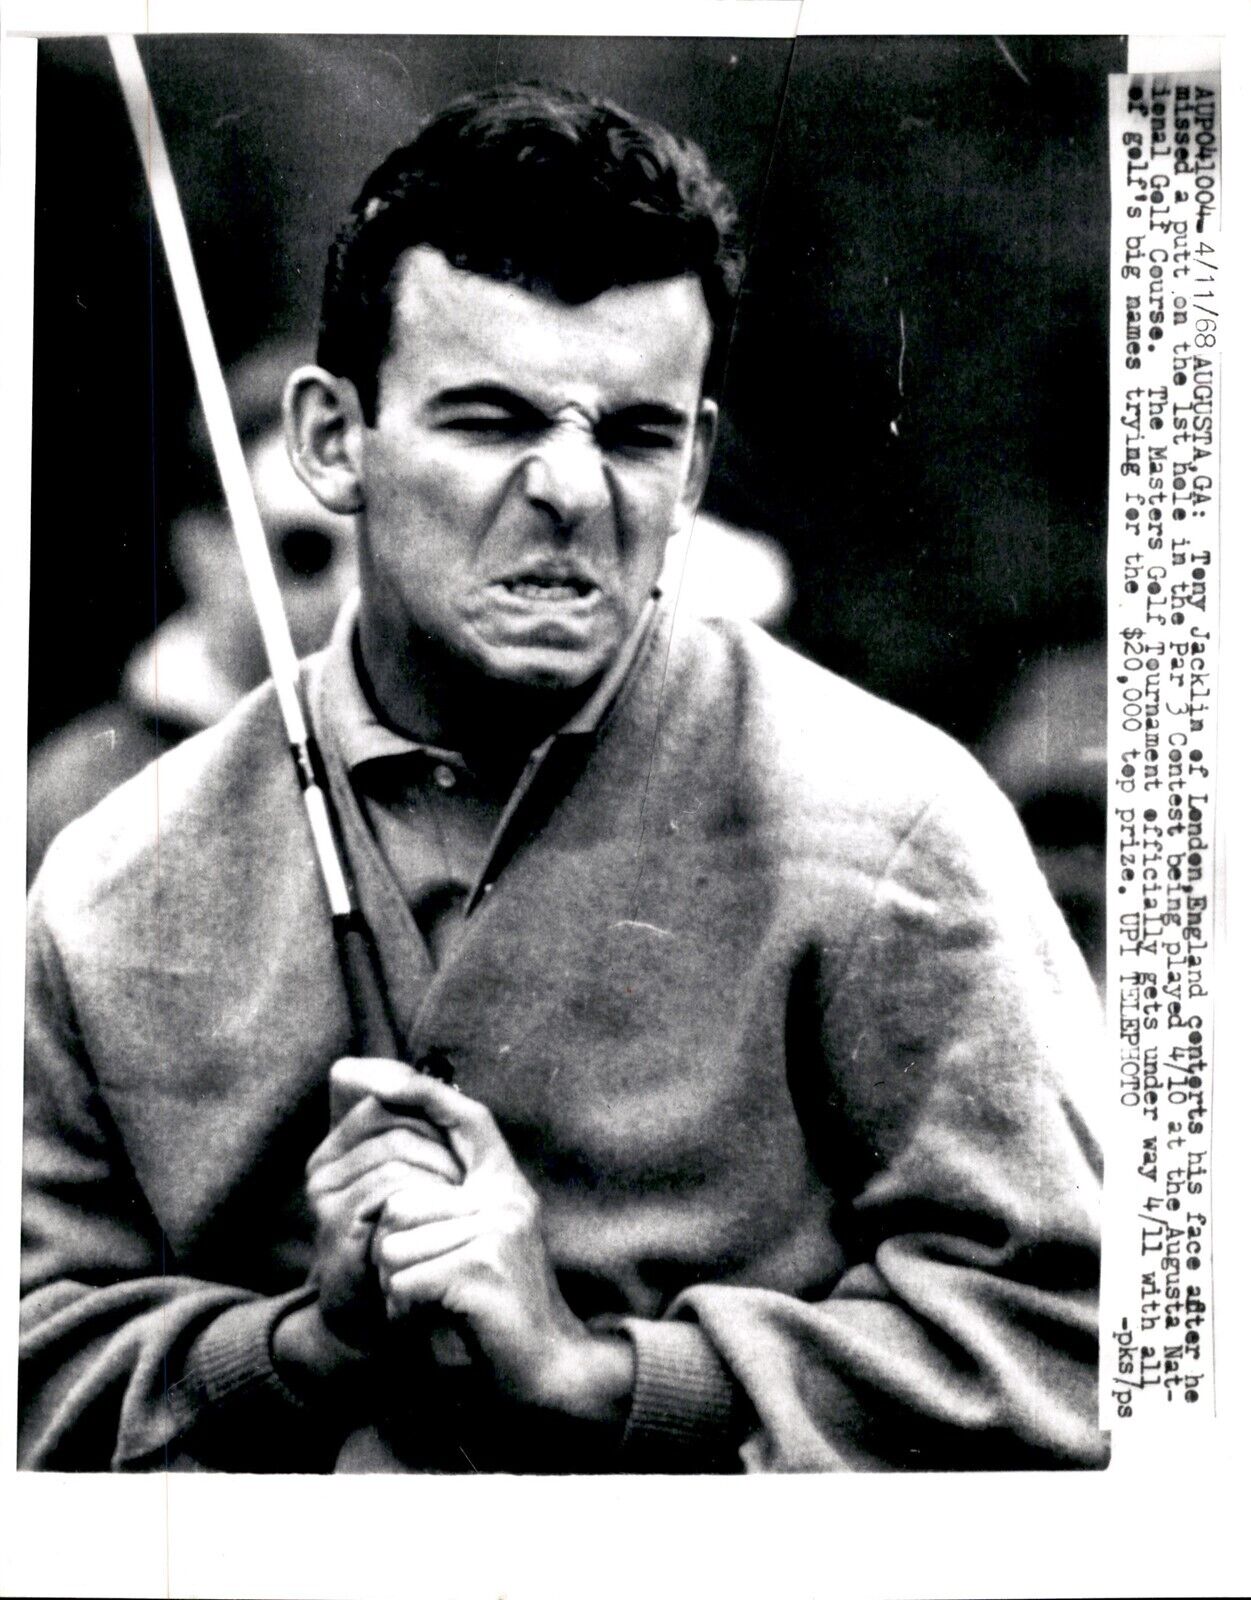 LD328 1968 UPI Wire Photo TONY JACKLIN REACTS TO MISSED PUTT MASTERS @ AUGUSTA